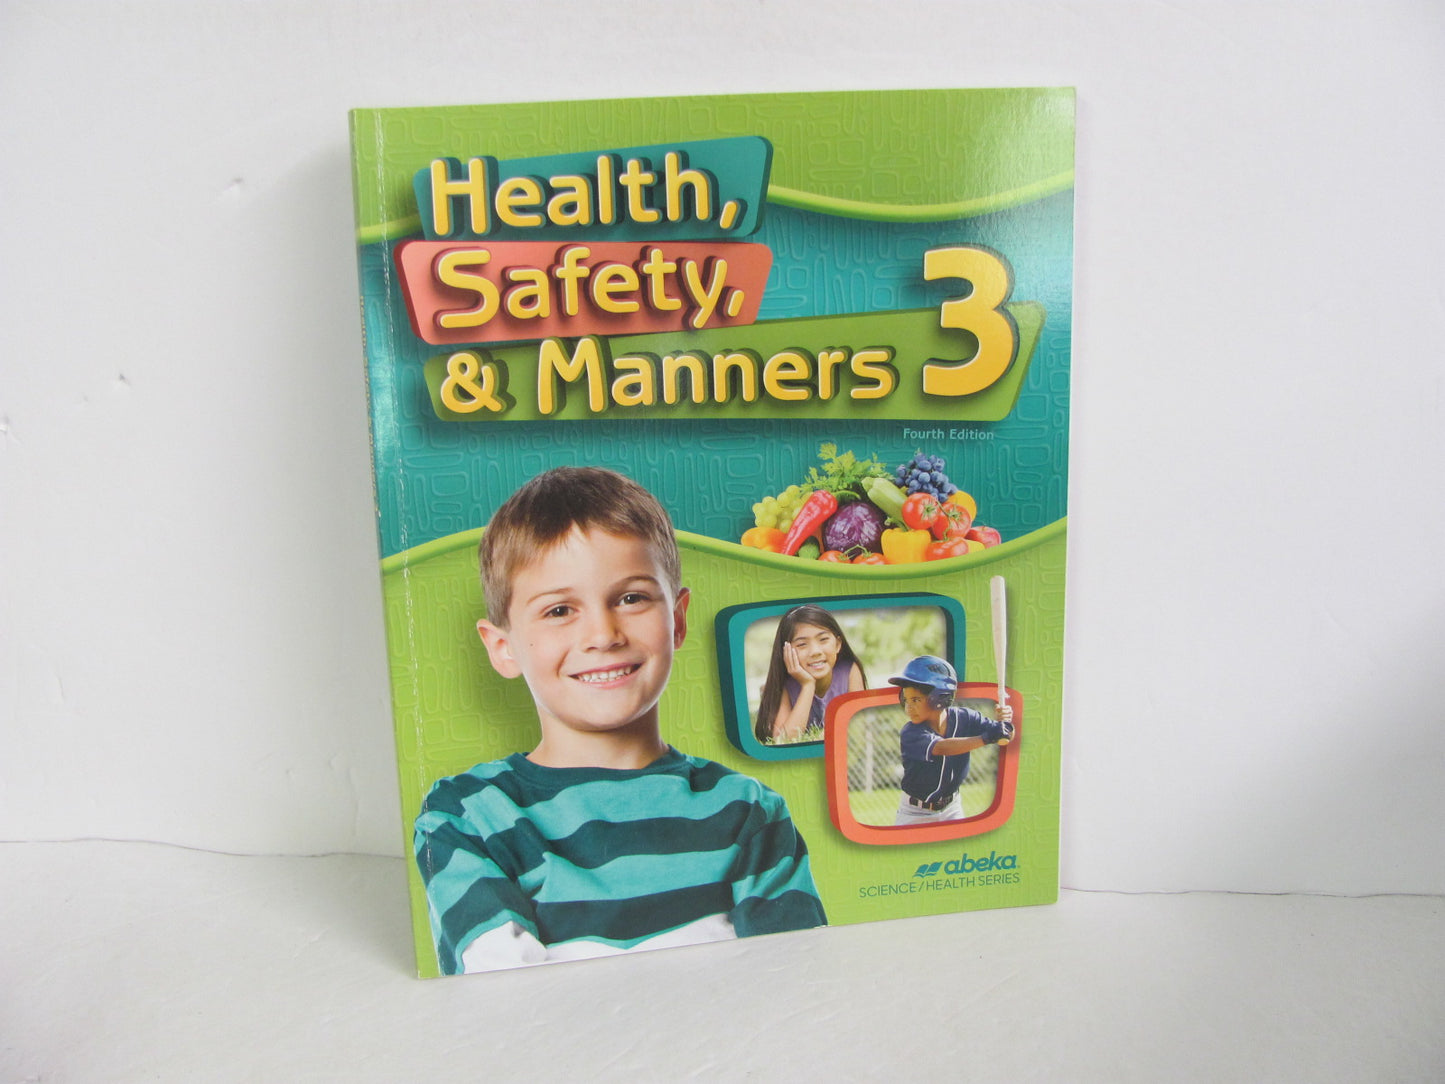 Health, Safety, & Manners Abeka Student Book Pre-Owned 3rd Grade Health Books